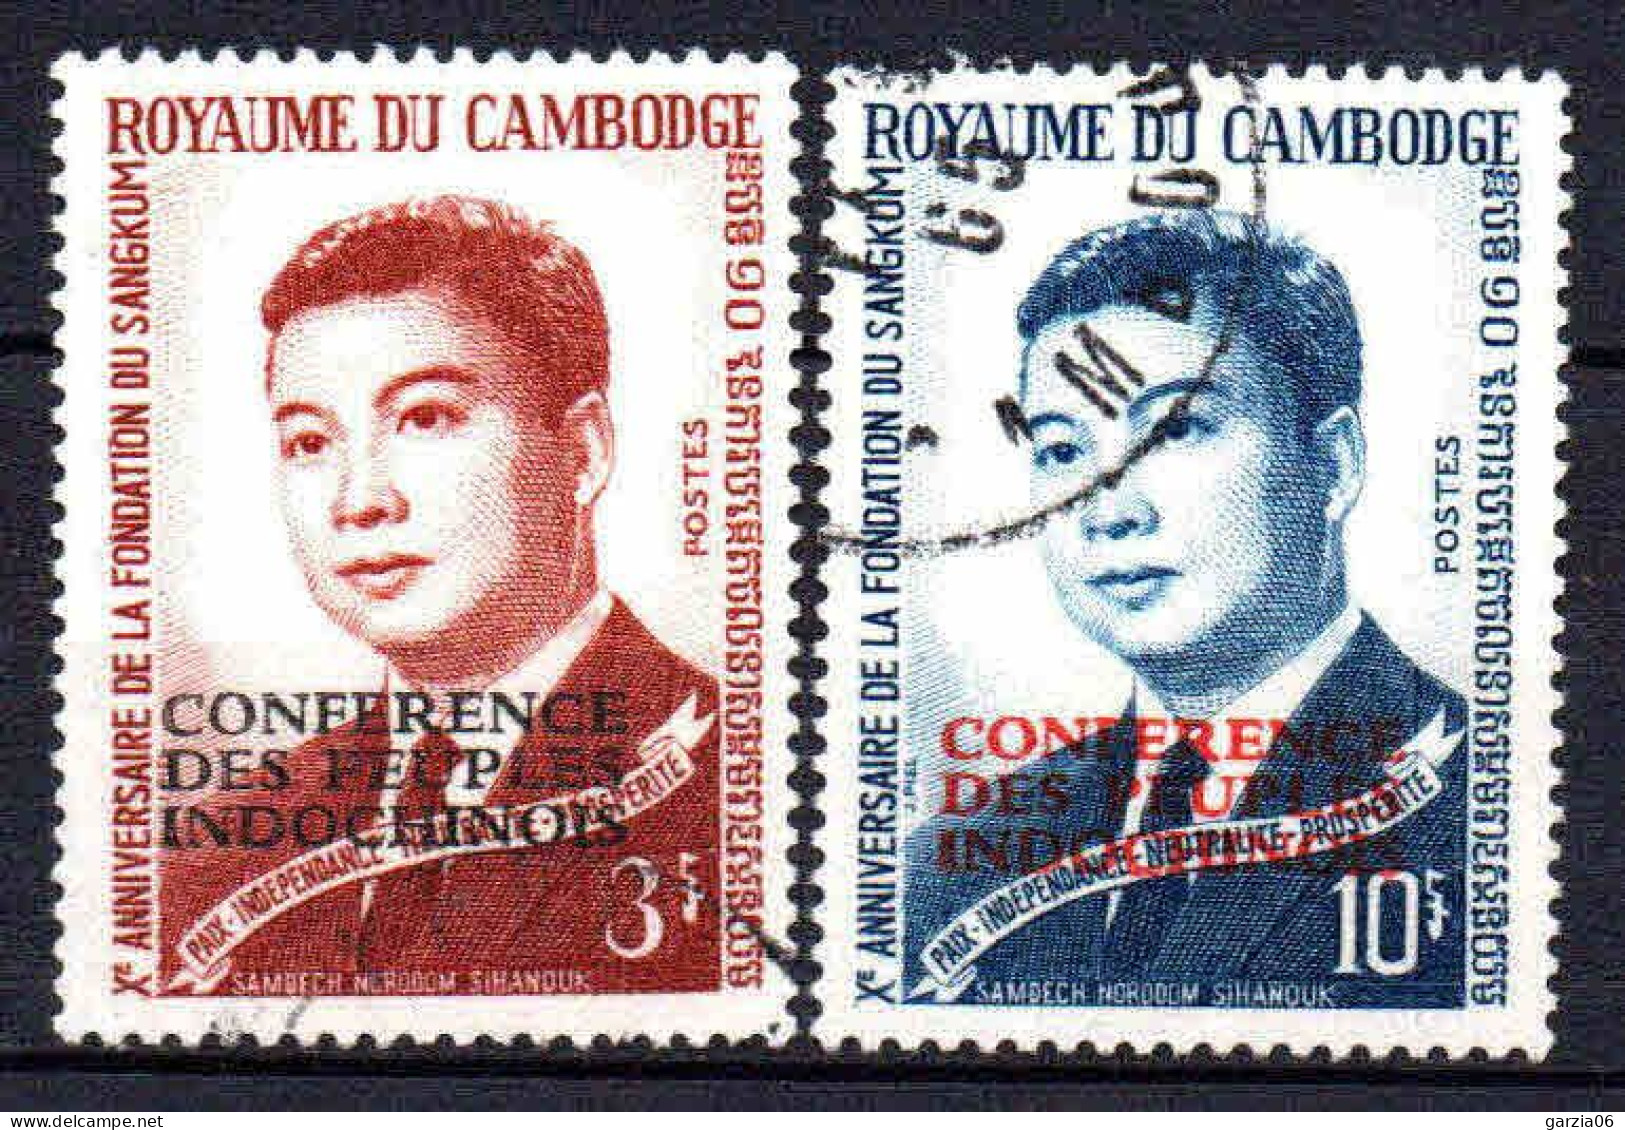 Cambodge - 1965  - Conférence Des Peuples    - N° 159/160   -  Oblit - Used - Cambodia